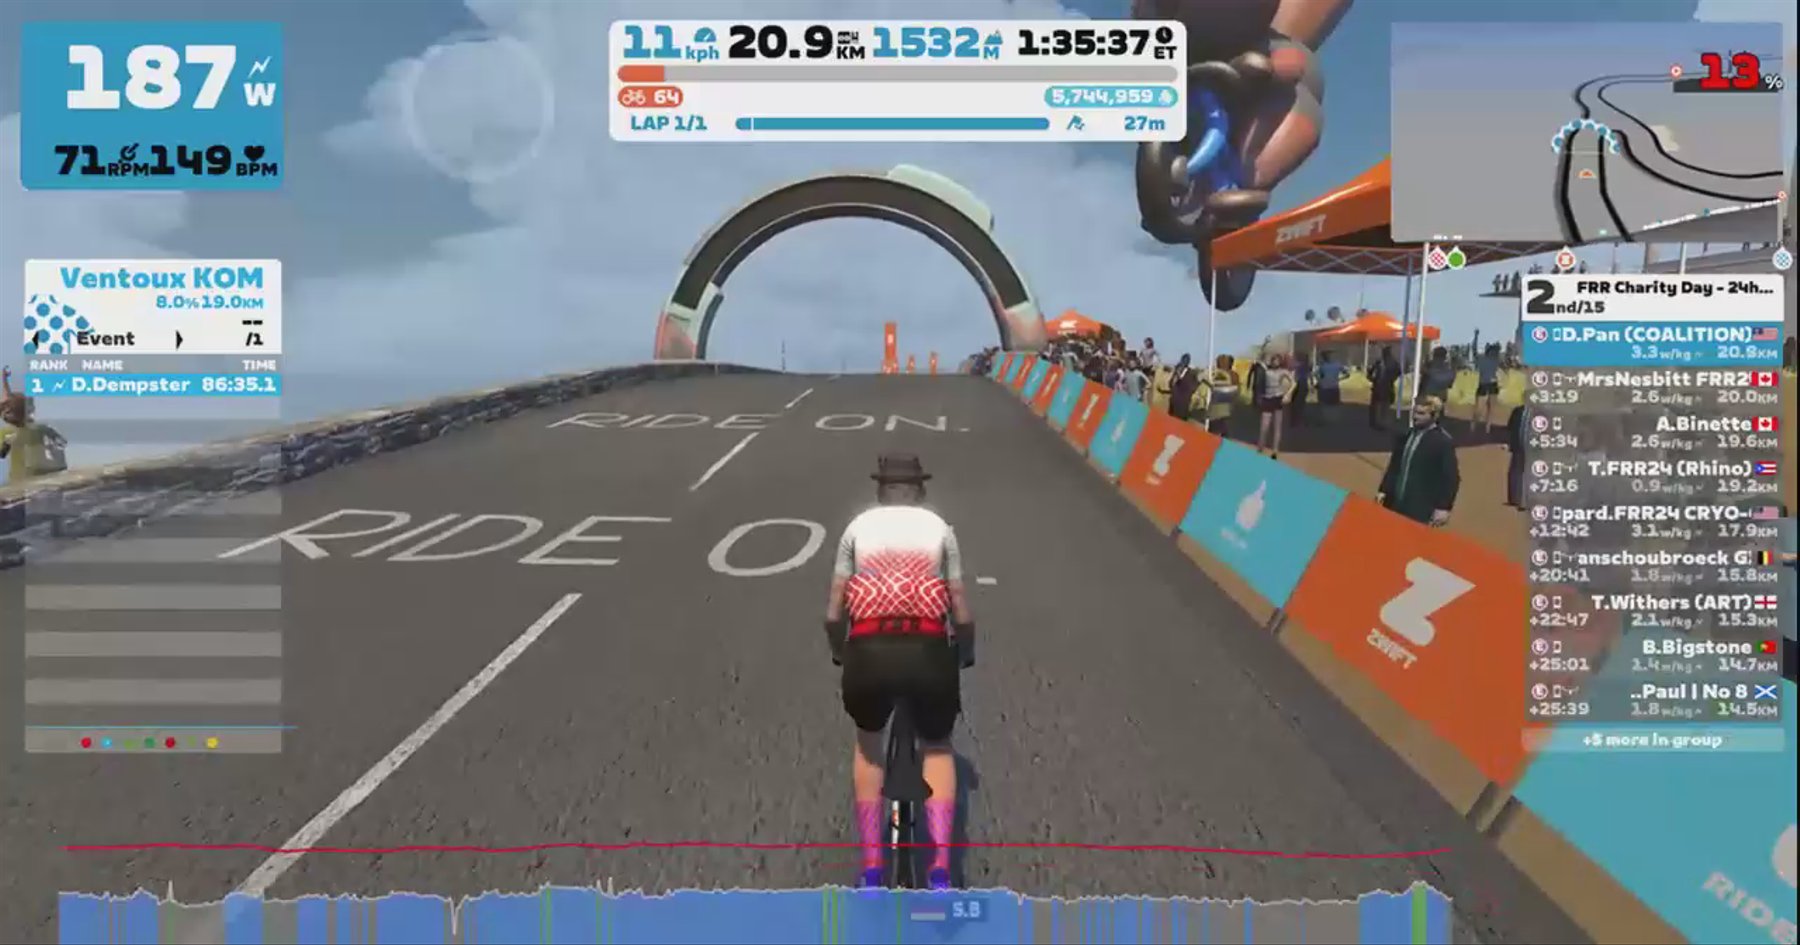 Zwift - Race: FRR Charity Day - 24hrs - A Top Ventop on Ven-Top in France